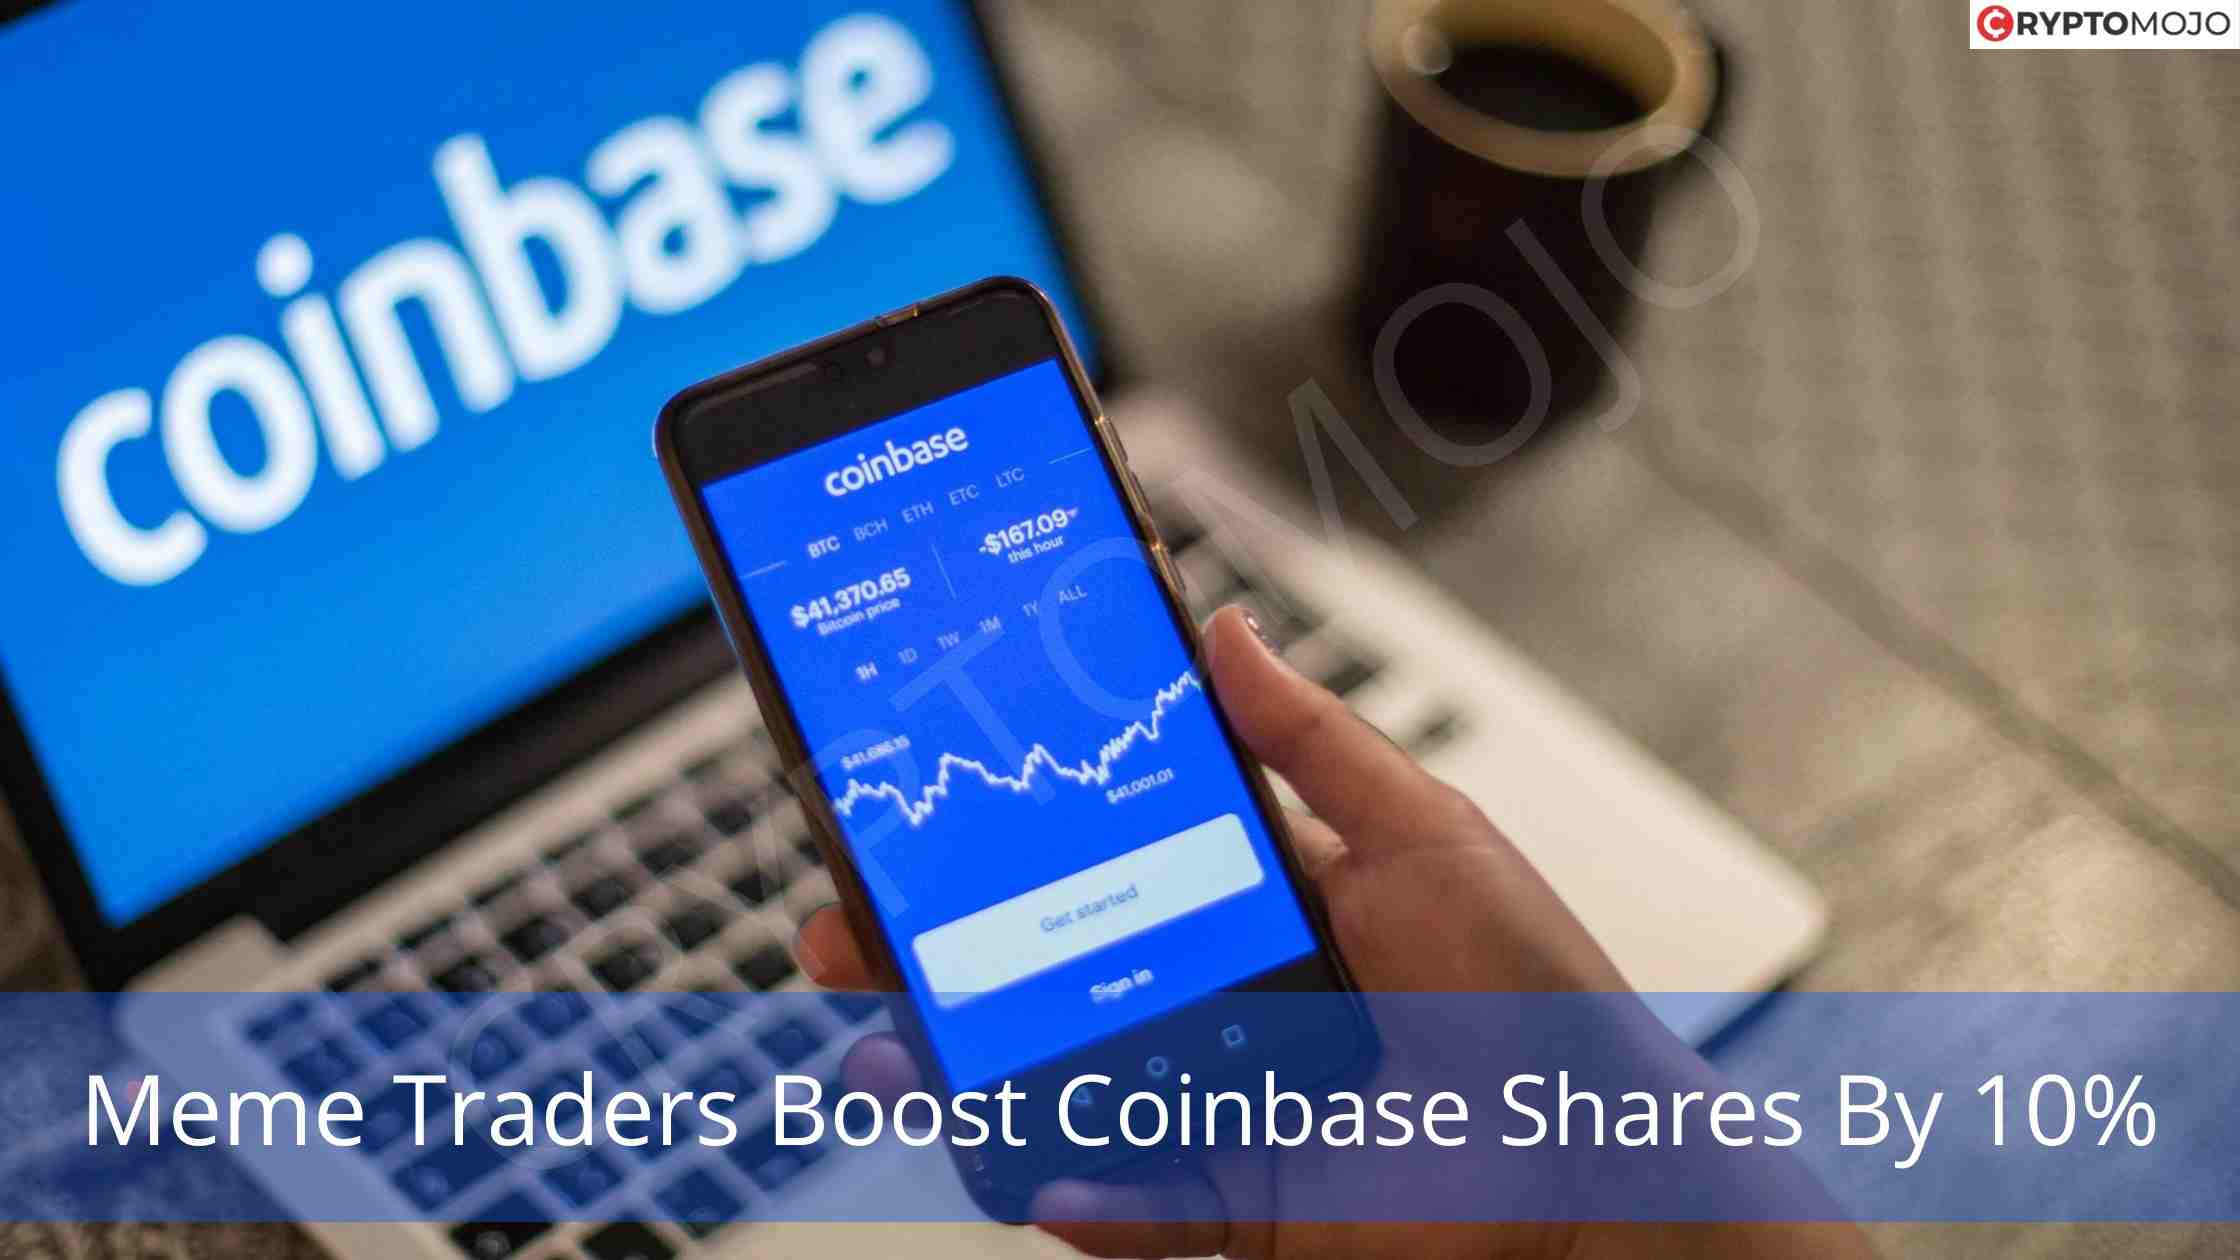 Meme Traders Boost Coinbase Shares By 10%